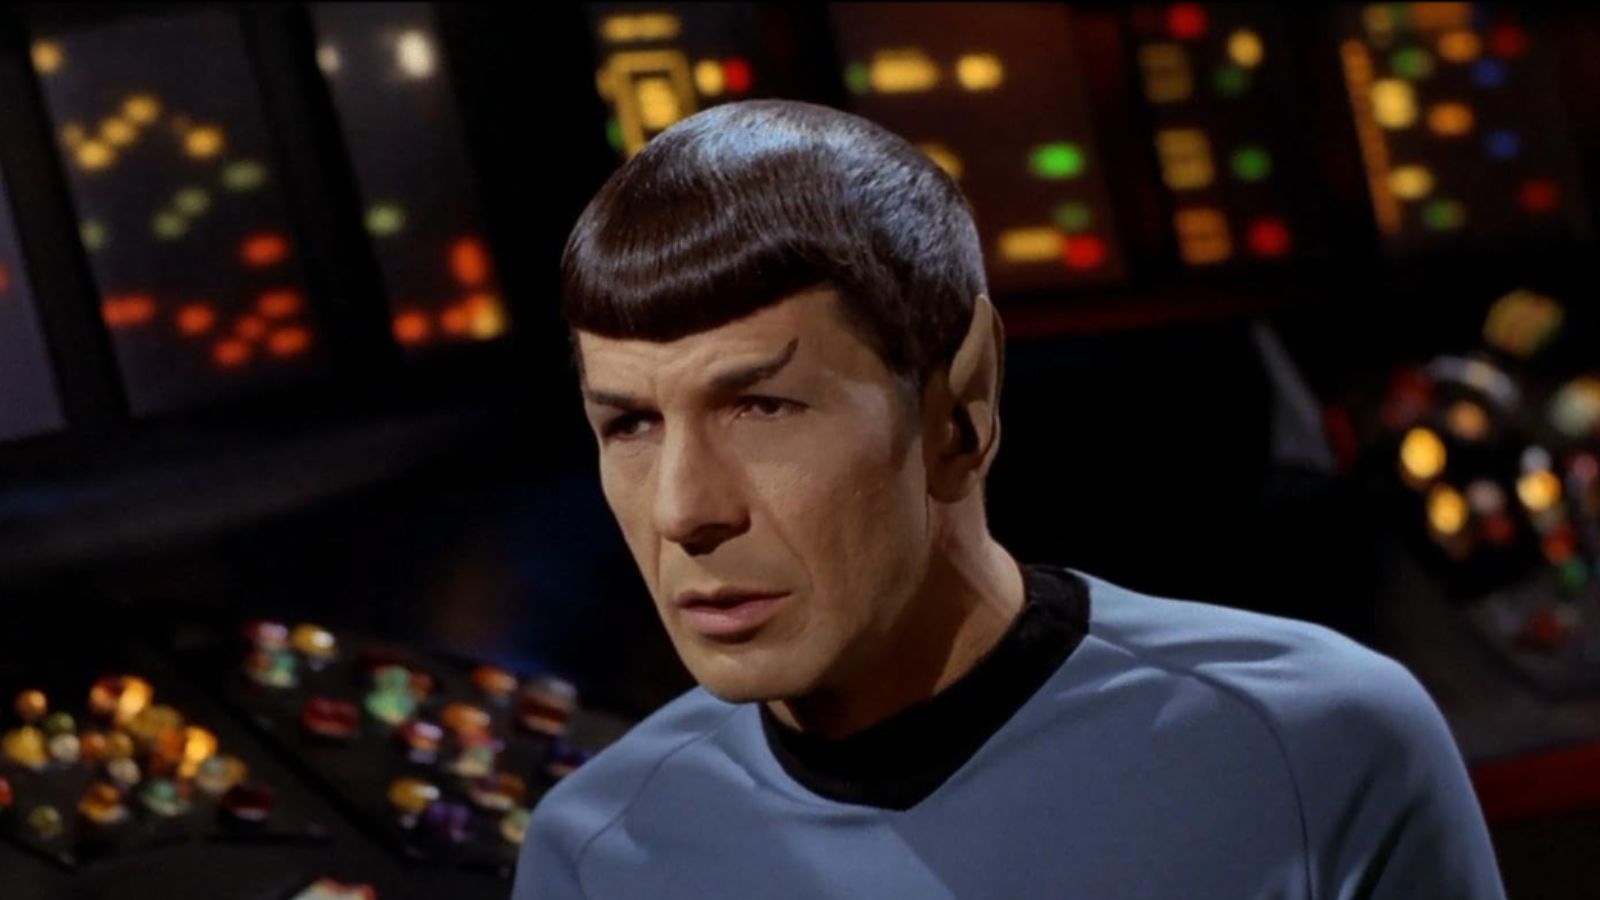 <p>With raised eyebrows, pointed ears, and the Vulcan salute, Nimoy’s Spock became synonymous with “Star Trek.” His portrayal of the character’s internal struggle between emotion and logic captured fans’ imaginations, making him an interstellar icon.</p>